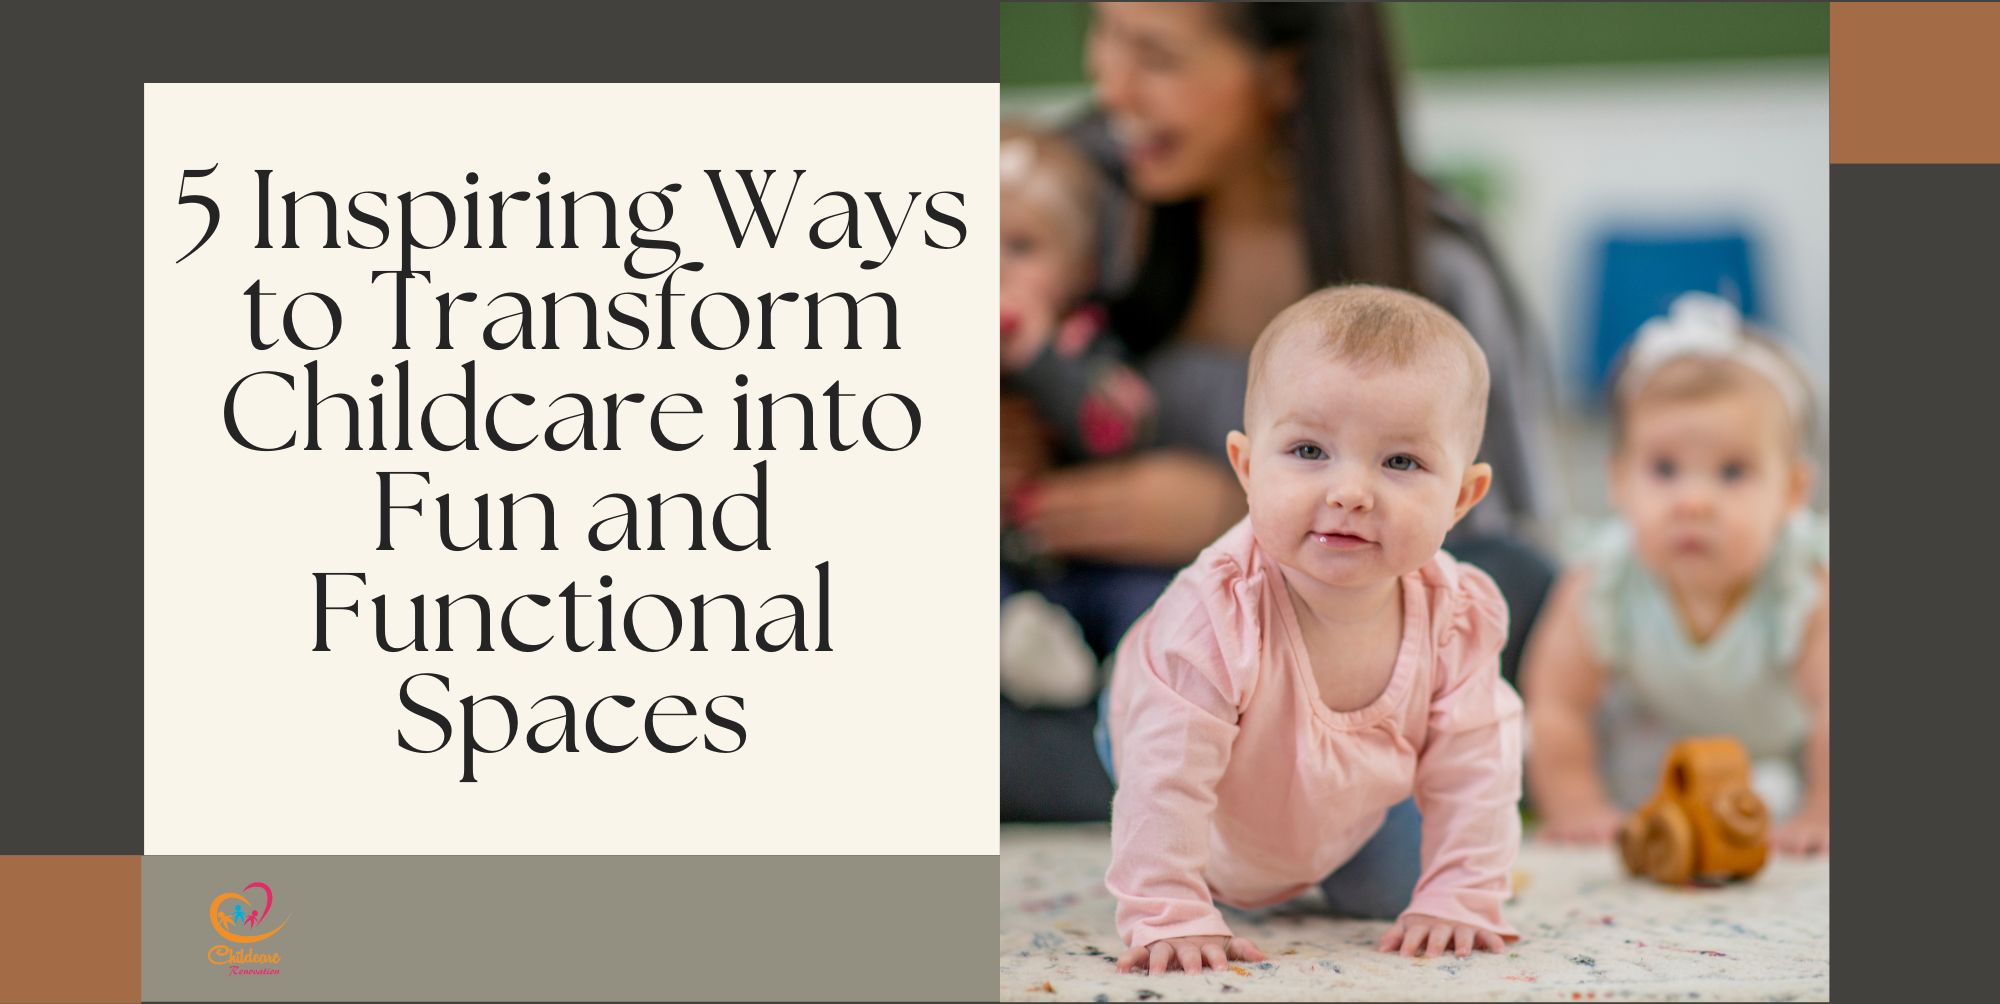 5 Inspiring Ways to Transform Childcare into Fun and Functional Spaces